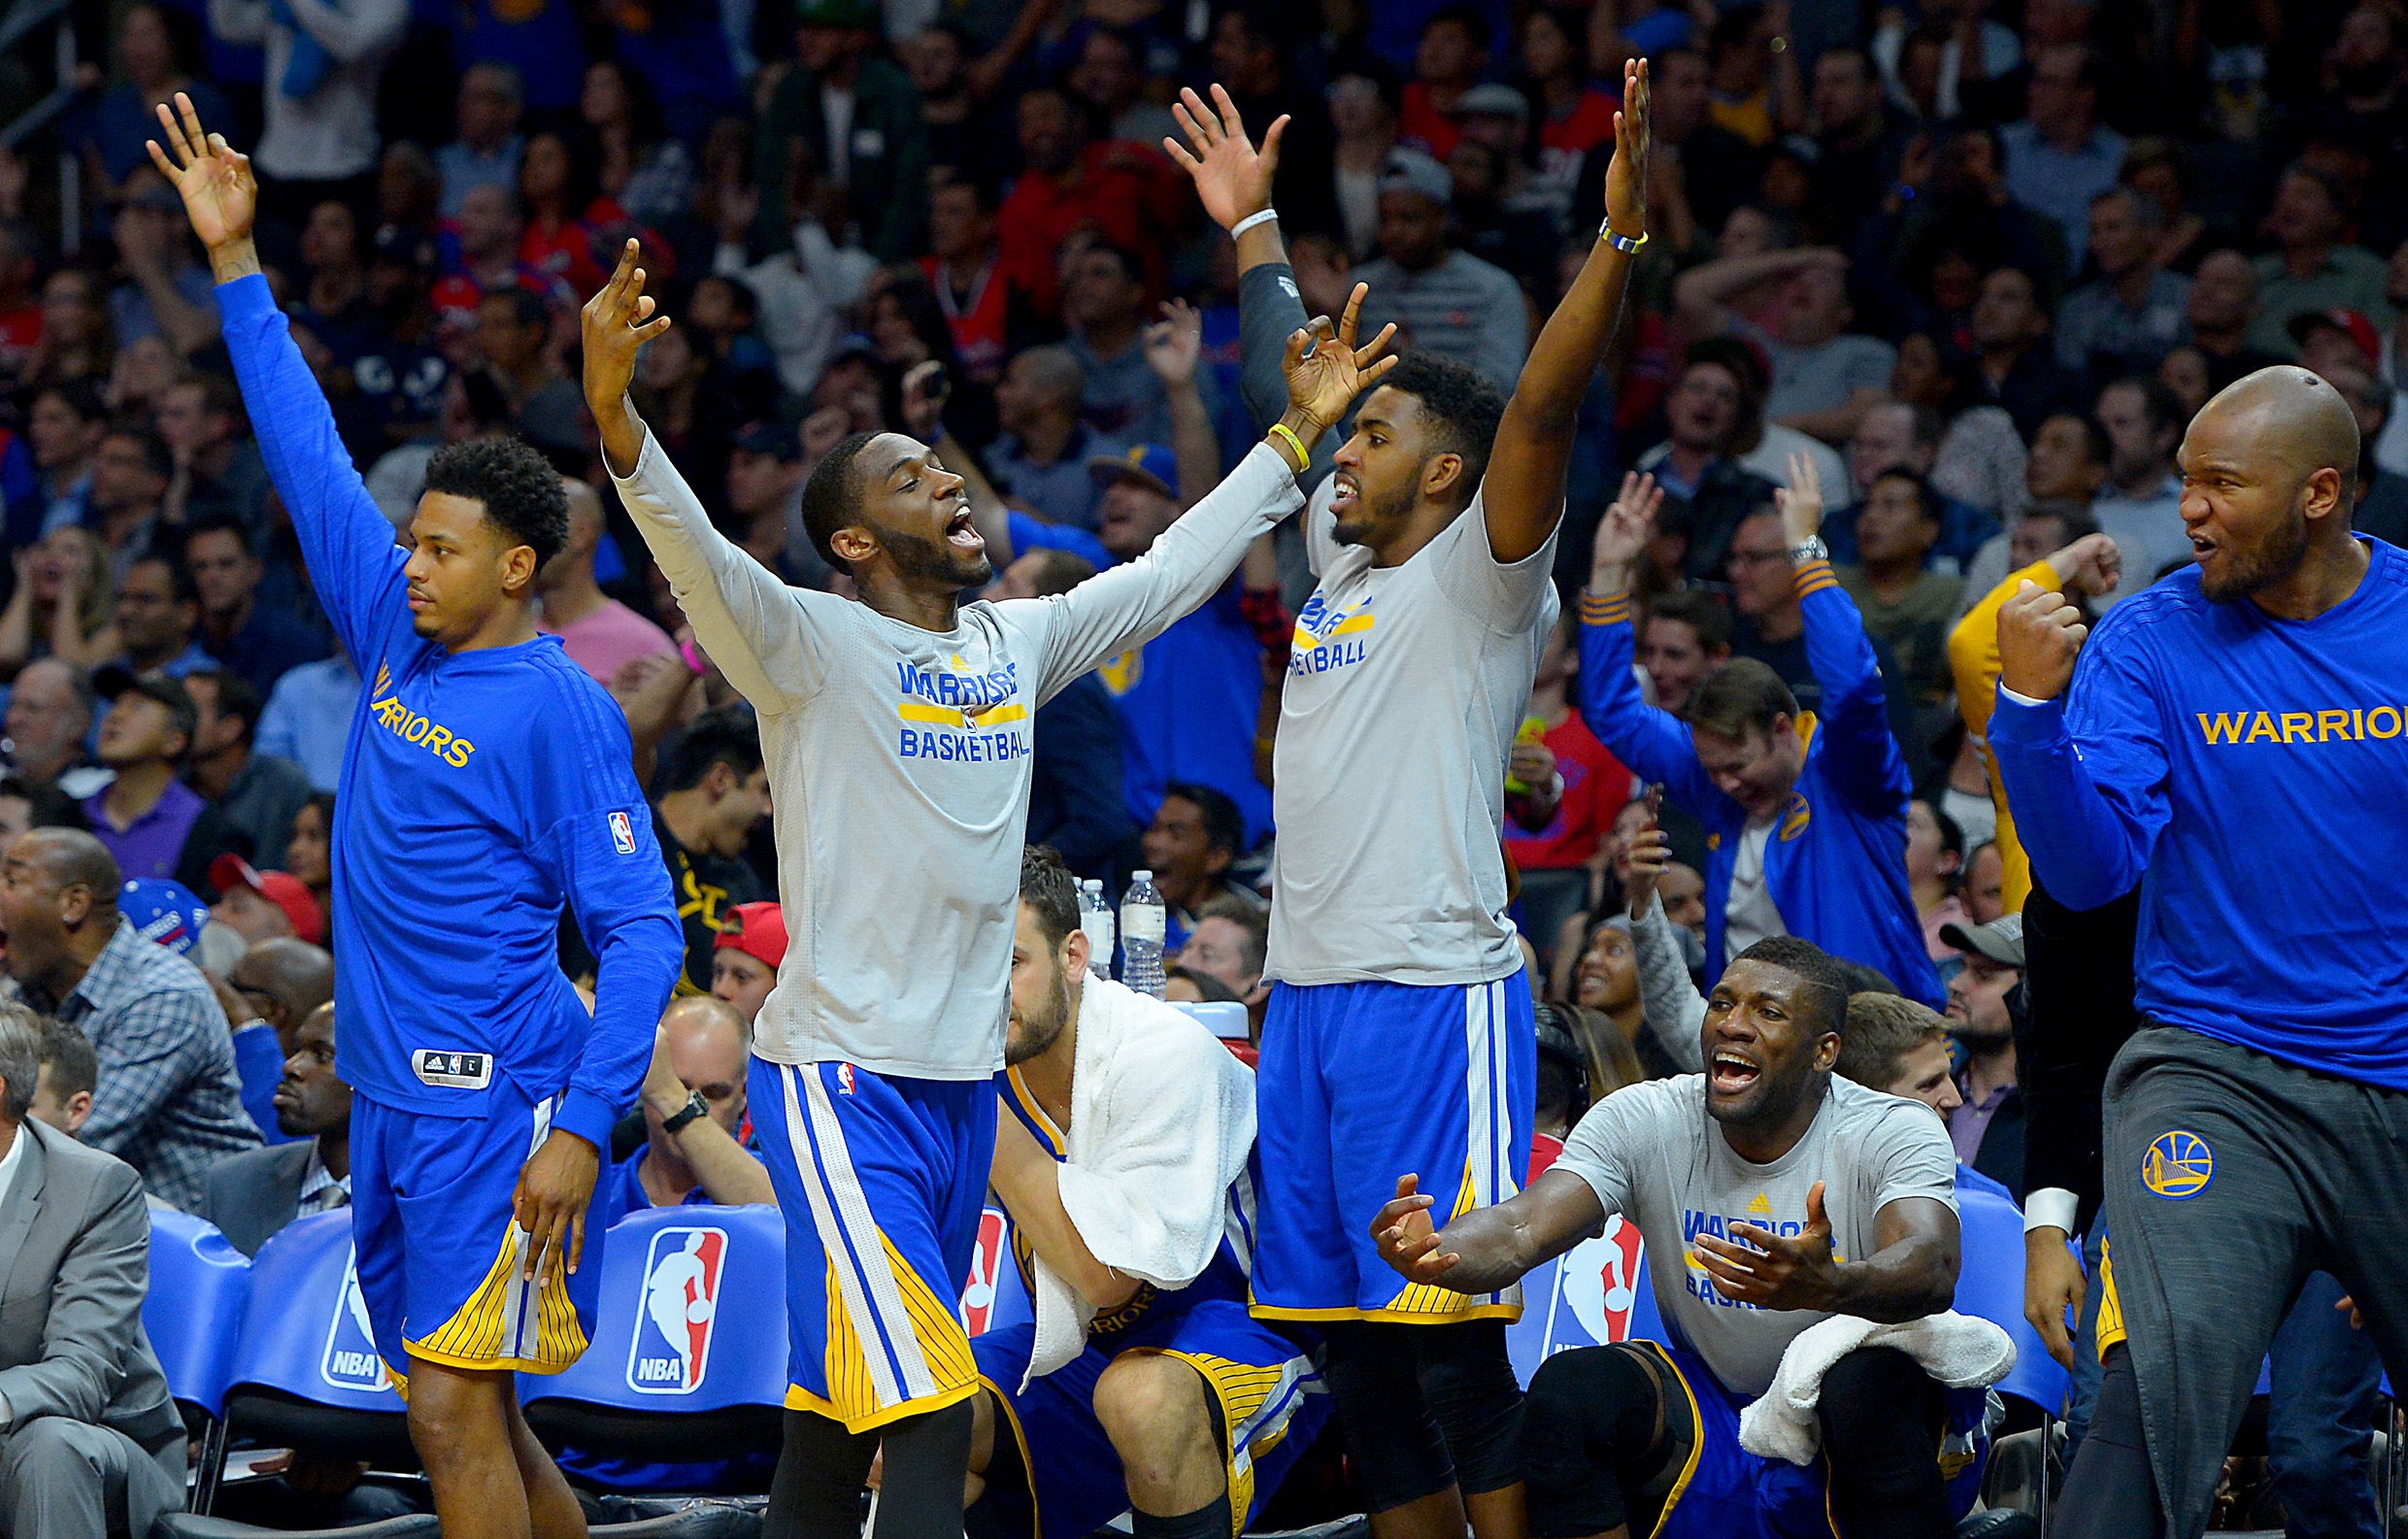 Warriors top Spurs ti tie 96 Bulls record with 72nd win